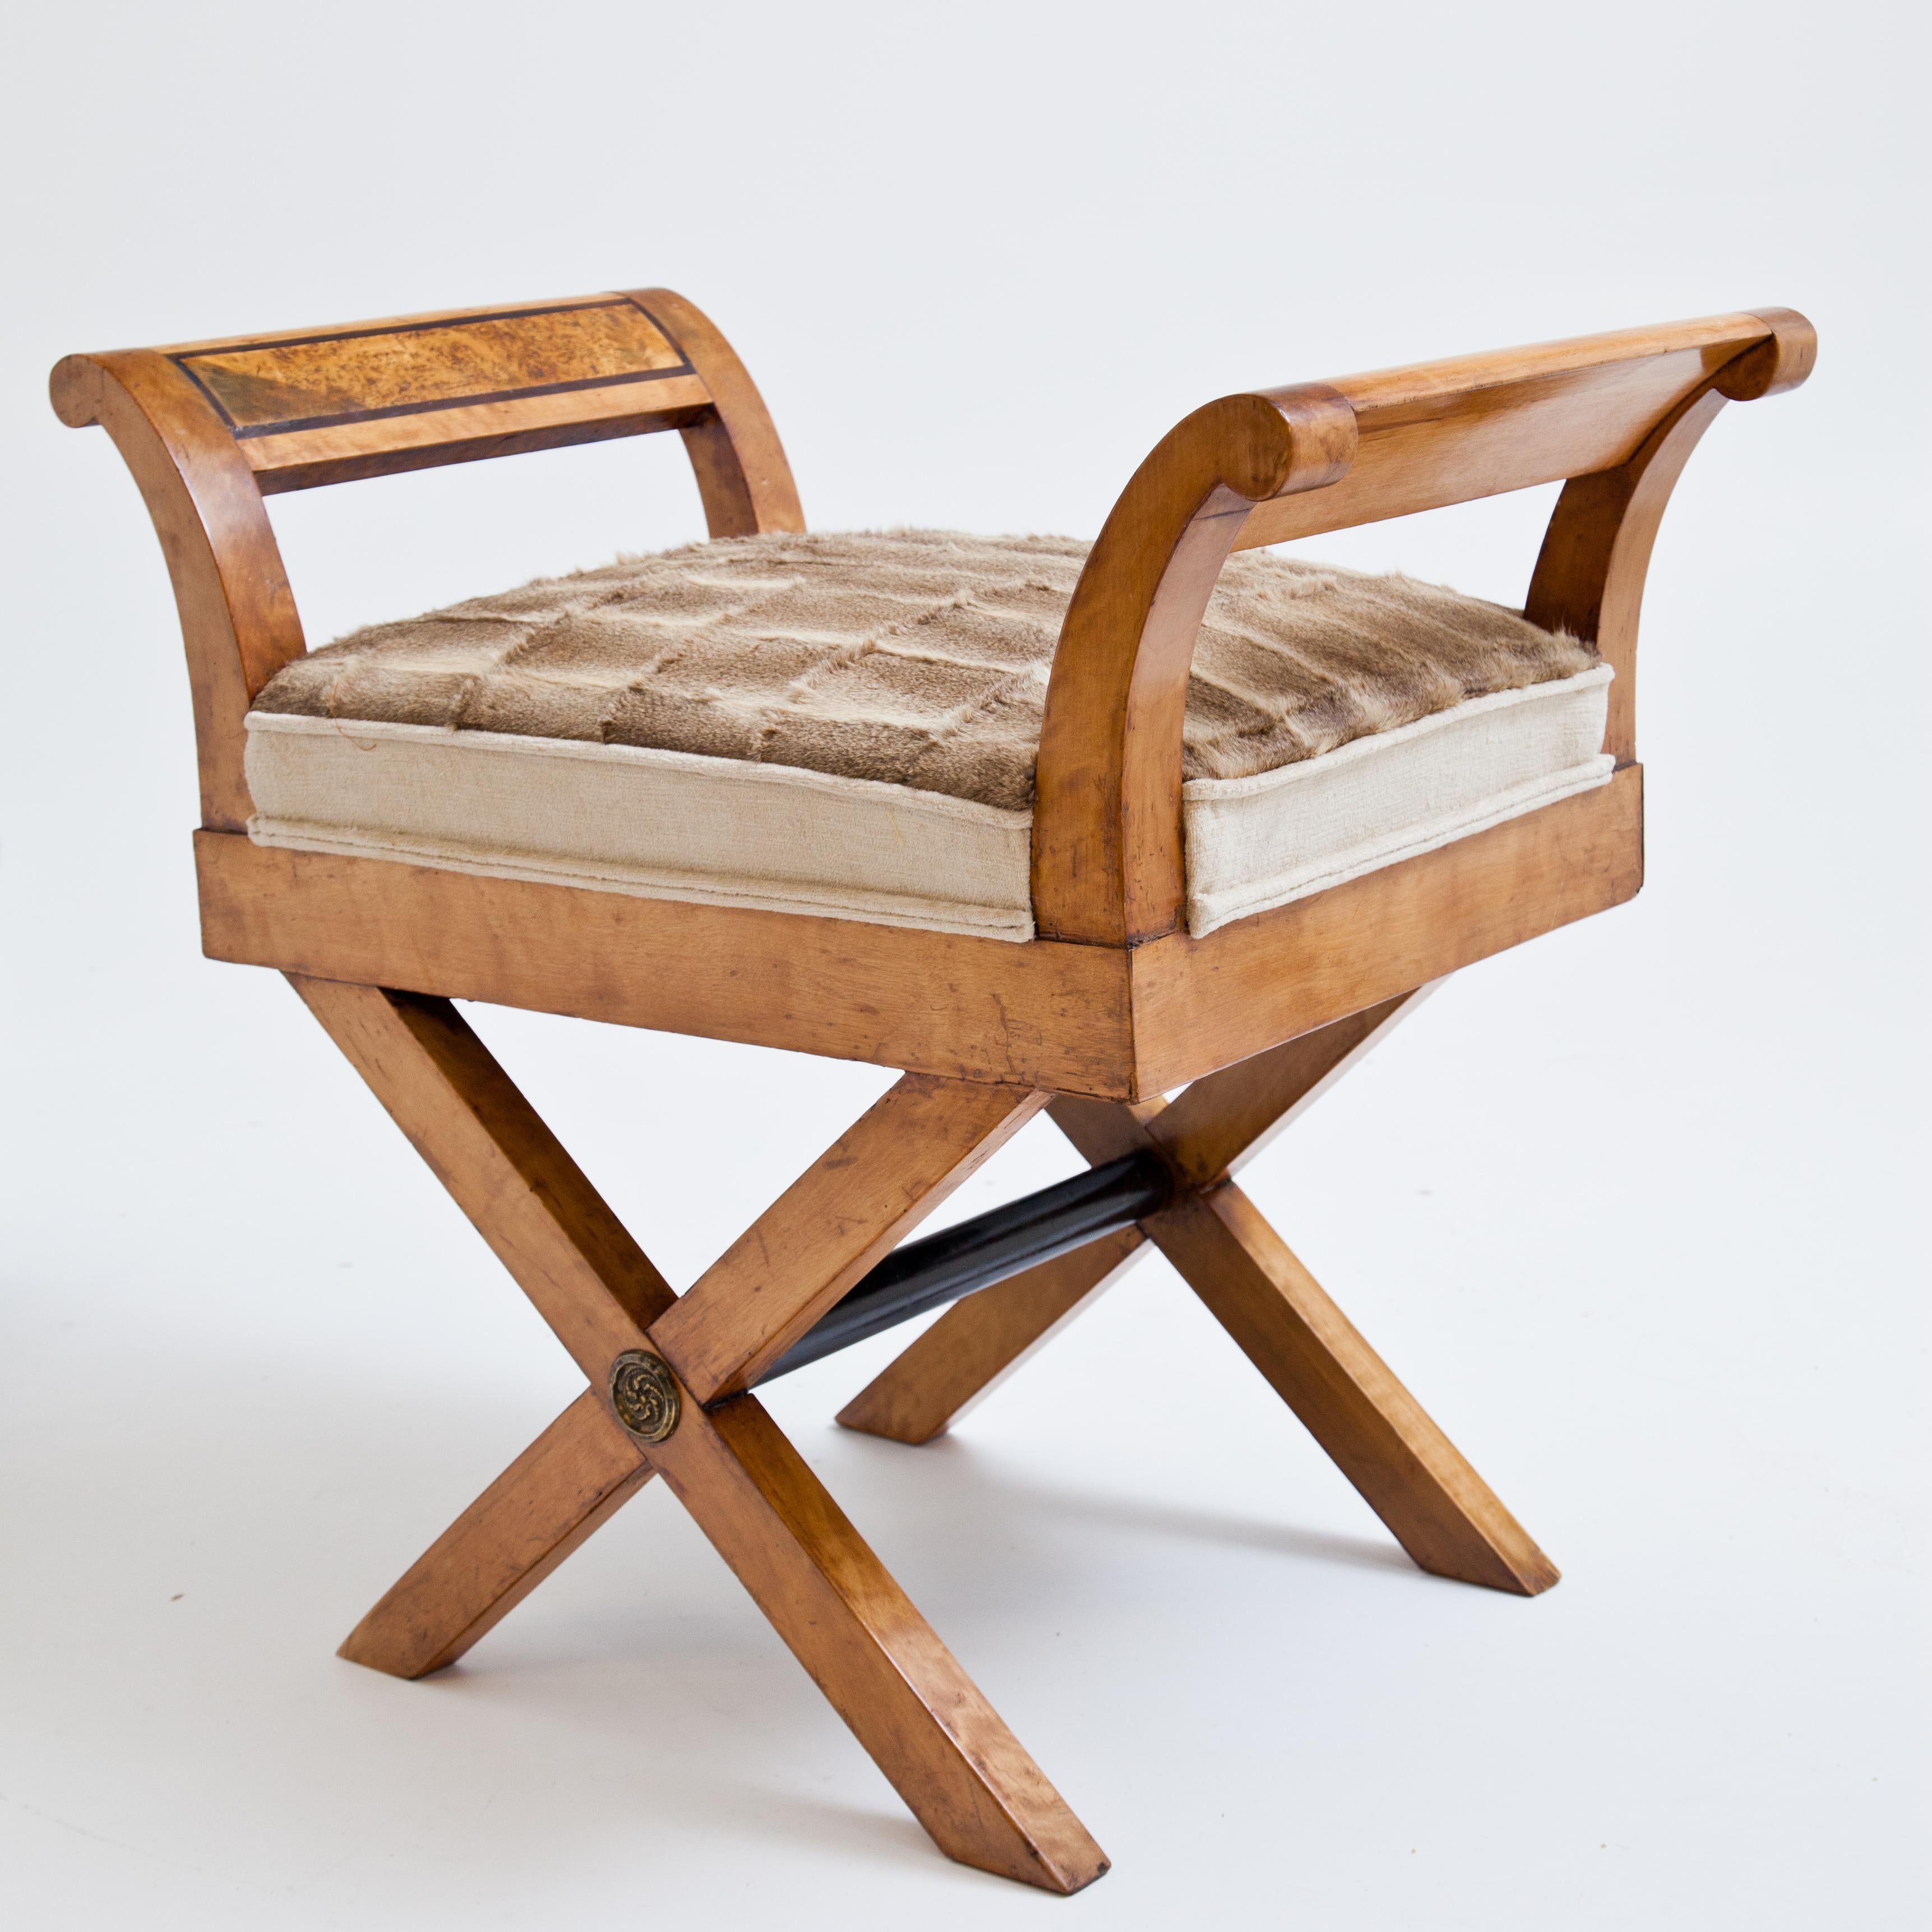 Biedermeier tabouret in the style of scissor chairs on X-shaped legs and outwardly curved armrests with rectangular burl wood inlays. Solid birch. The seat was newly covered with deer skin.